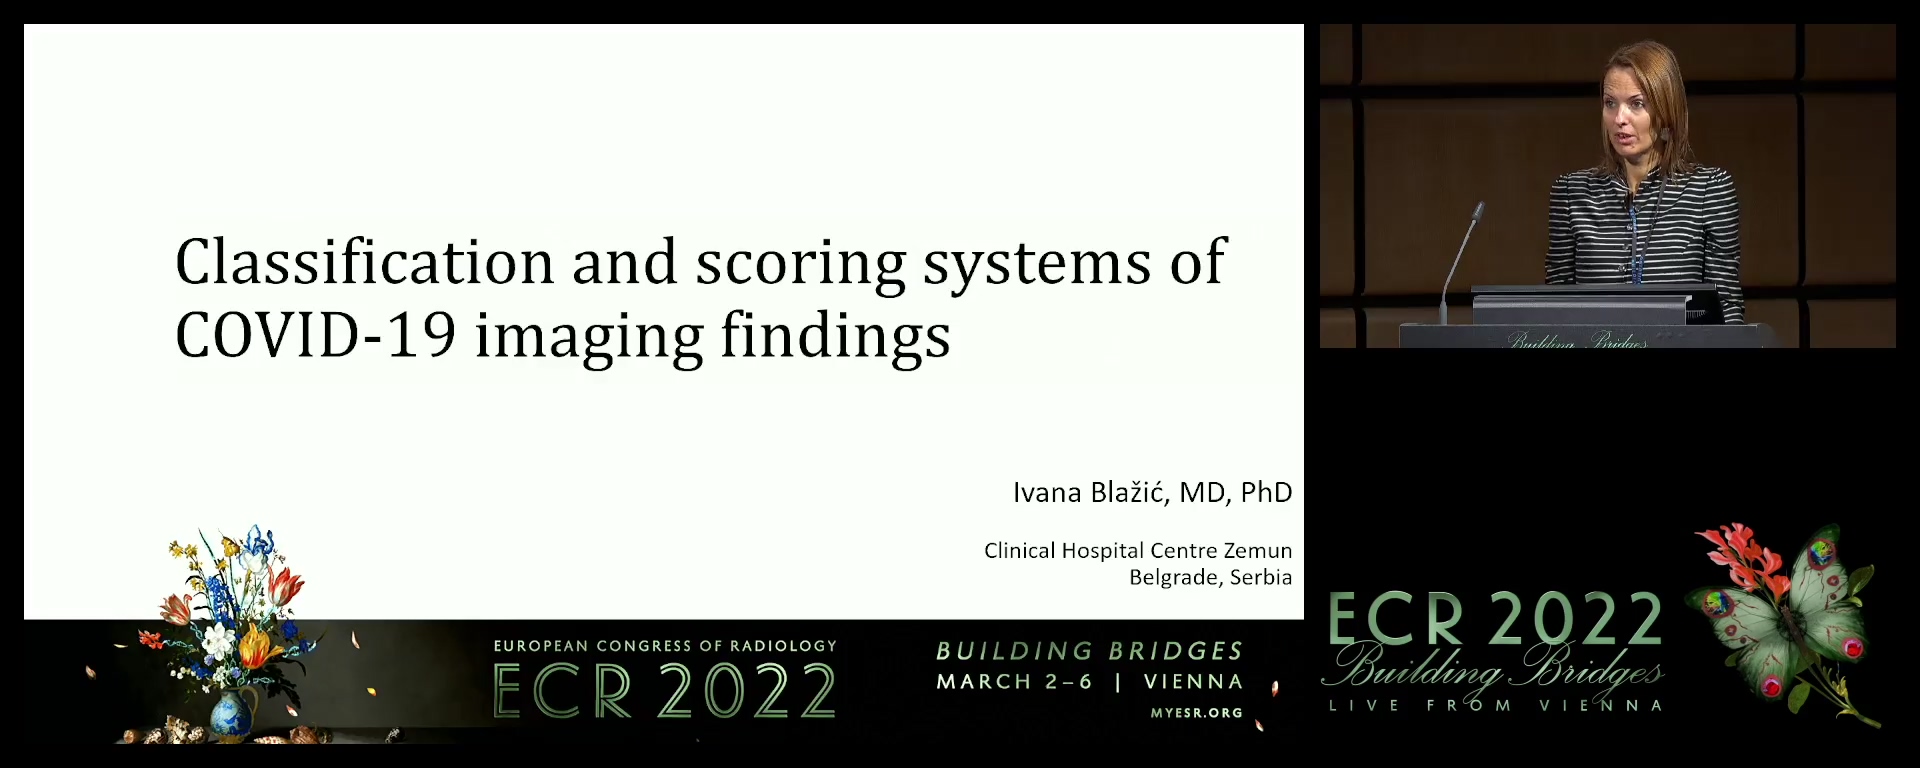 Classification and scoring systems of COVID-19 imaging findings